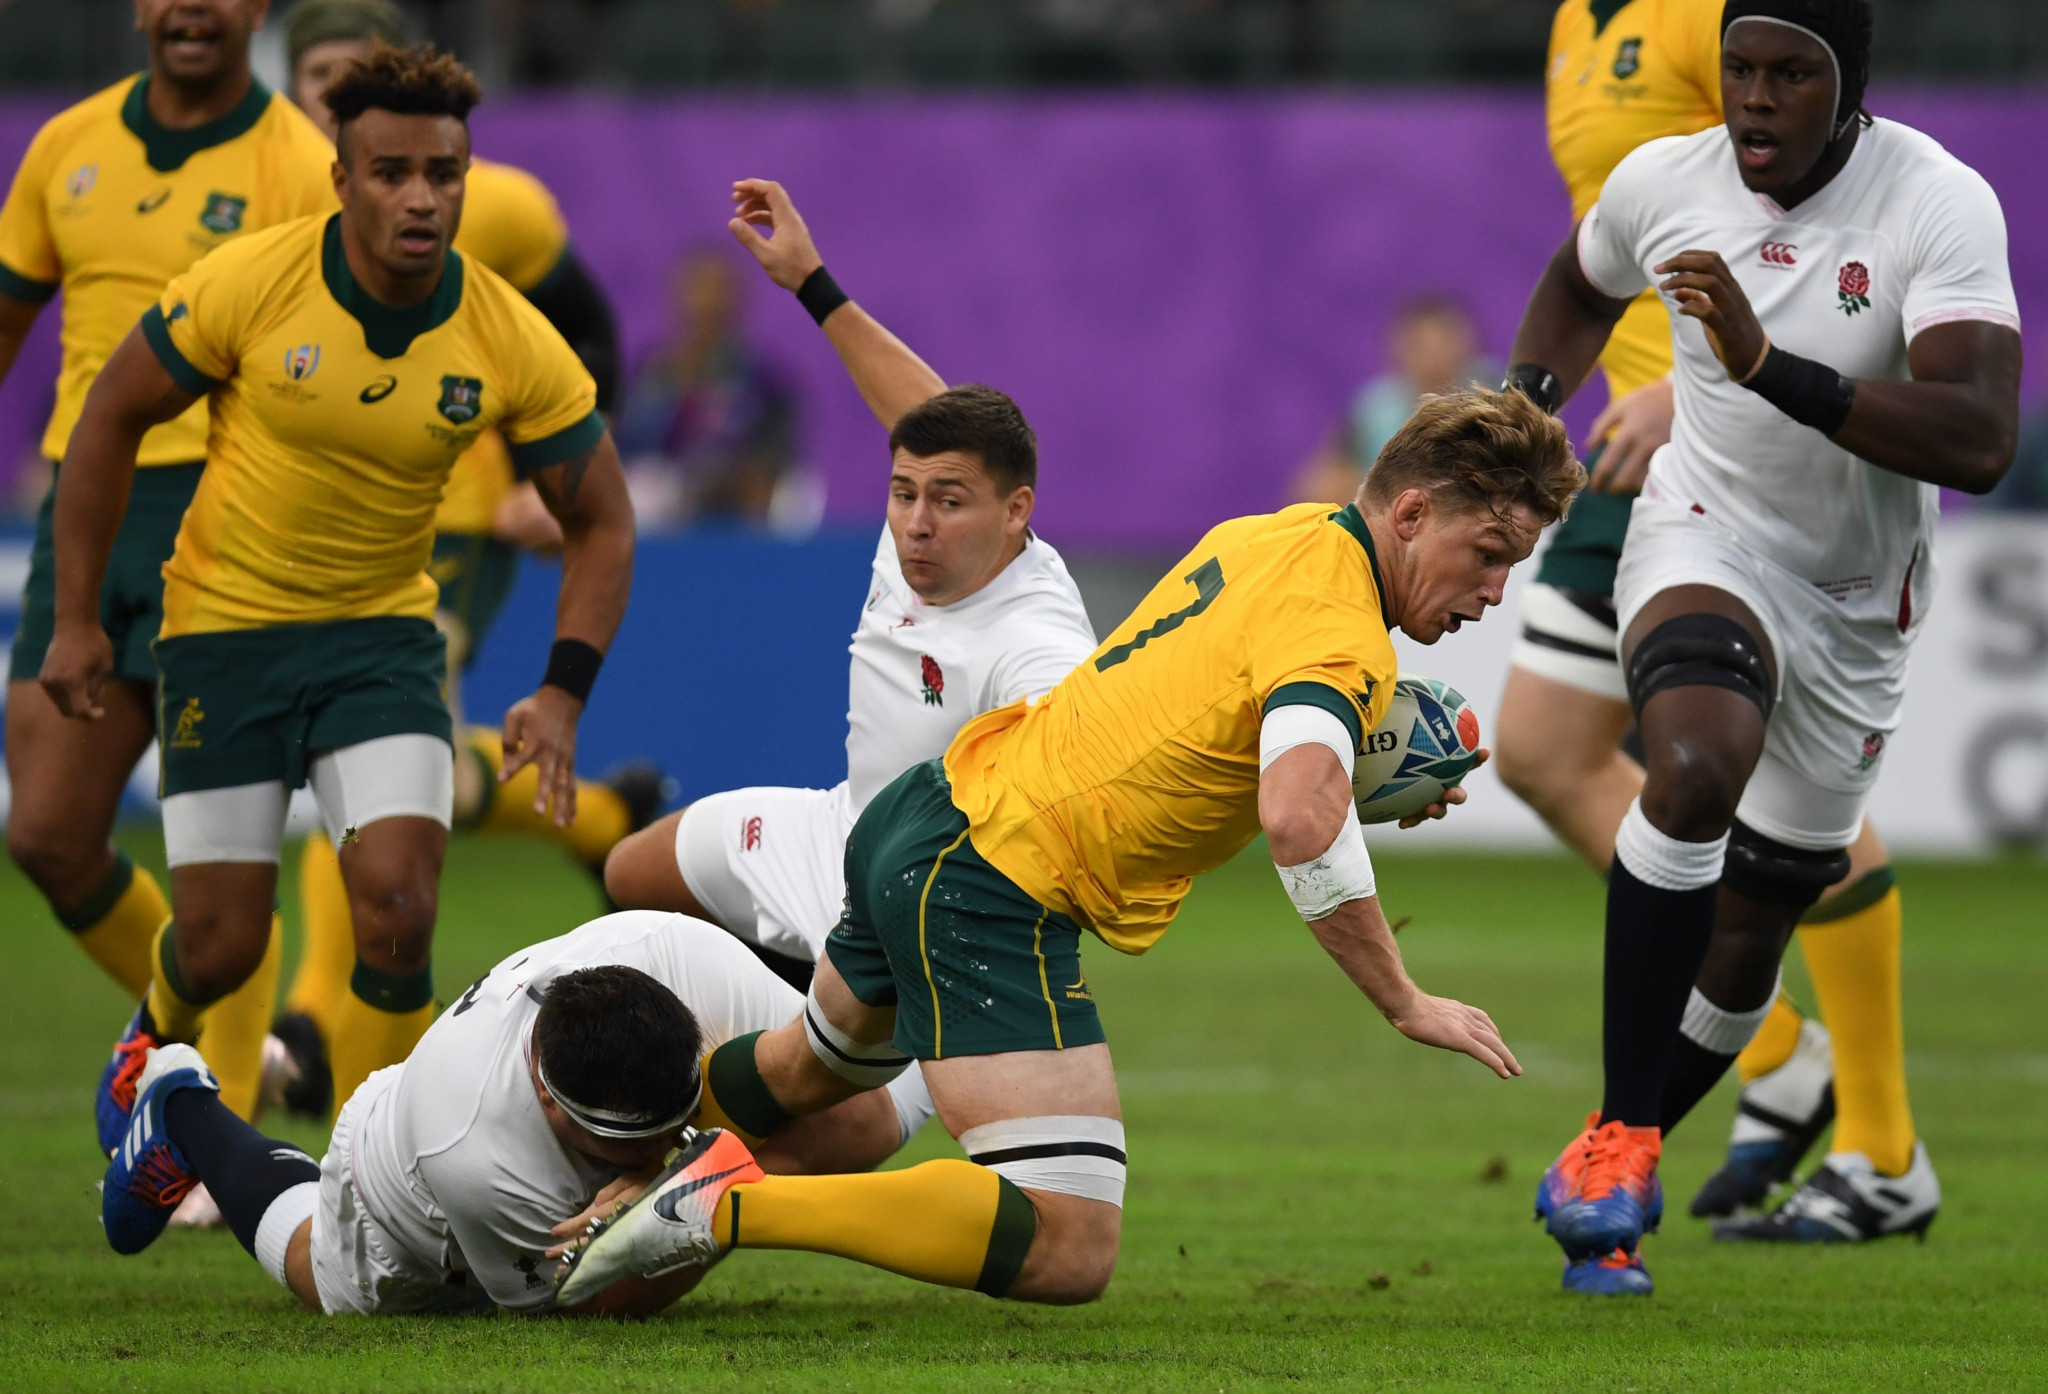 Australia Rugby World Cup GettyImages 1176824332 